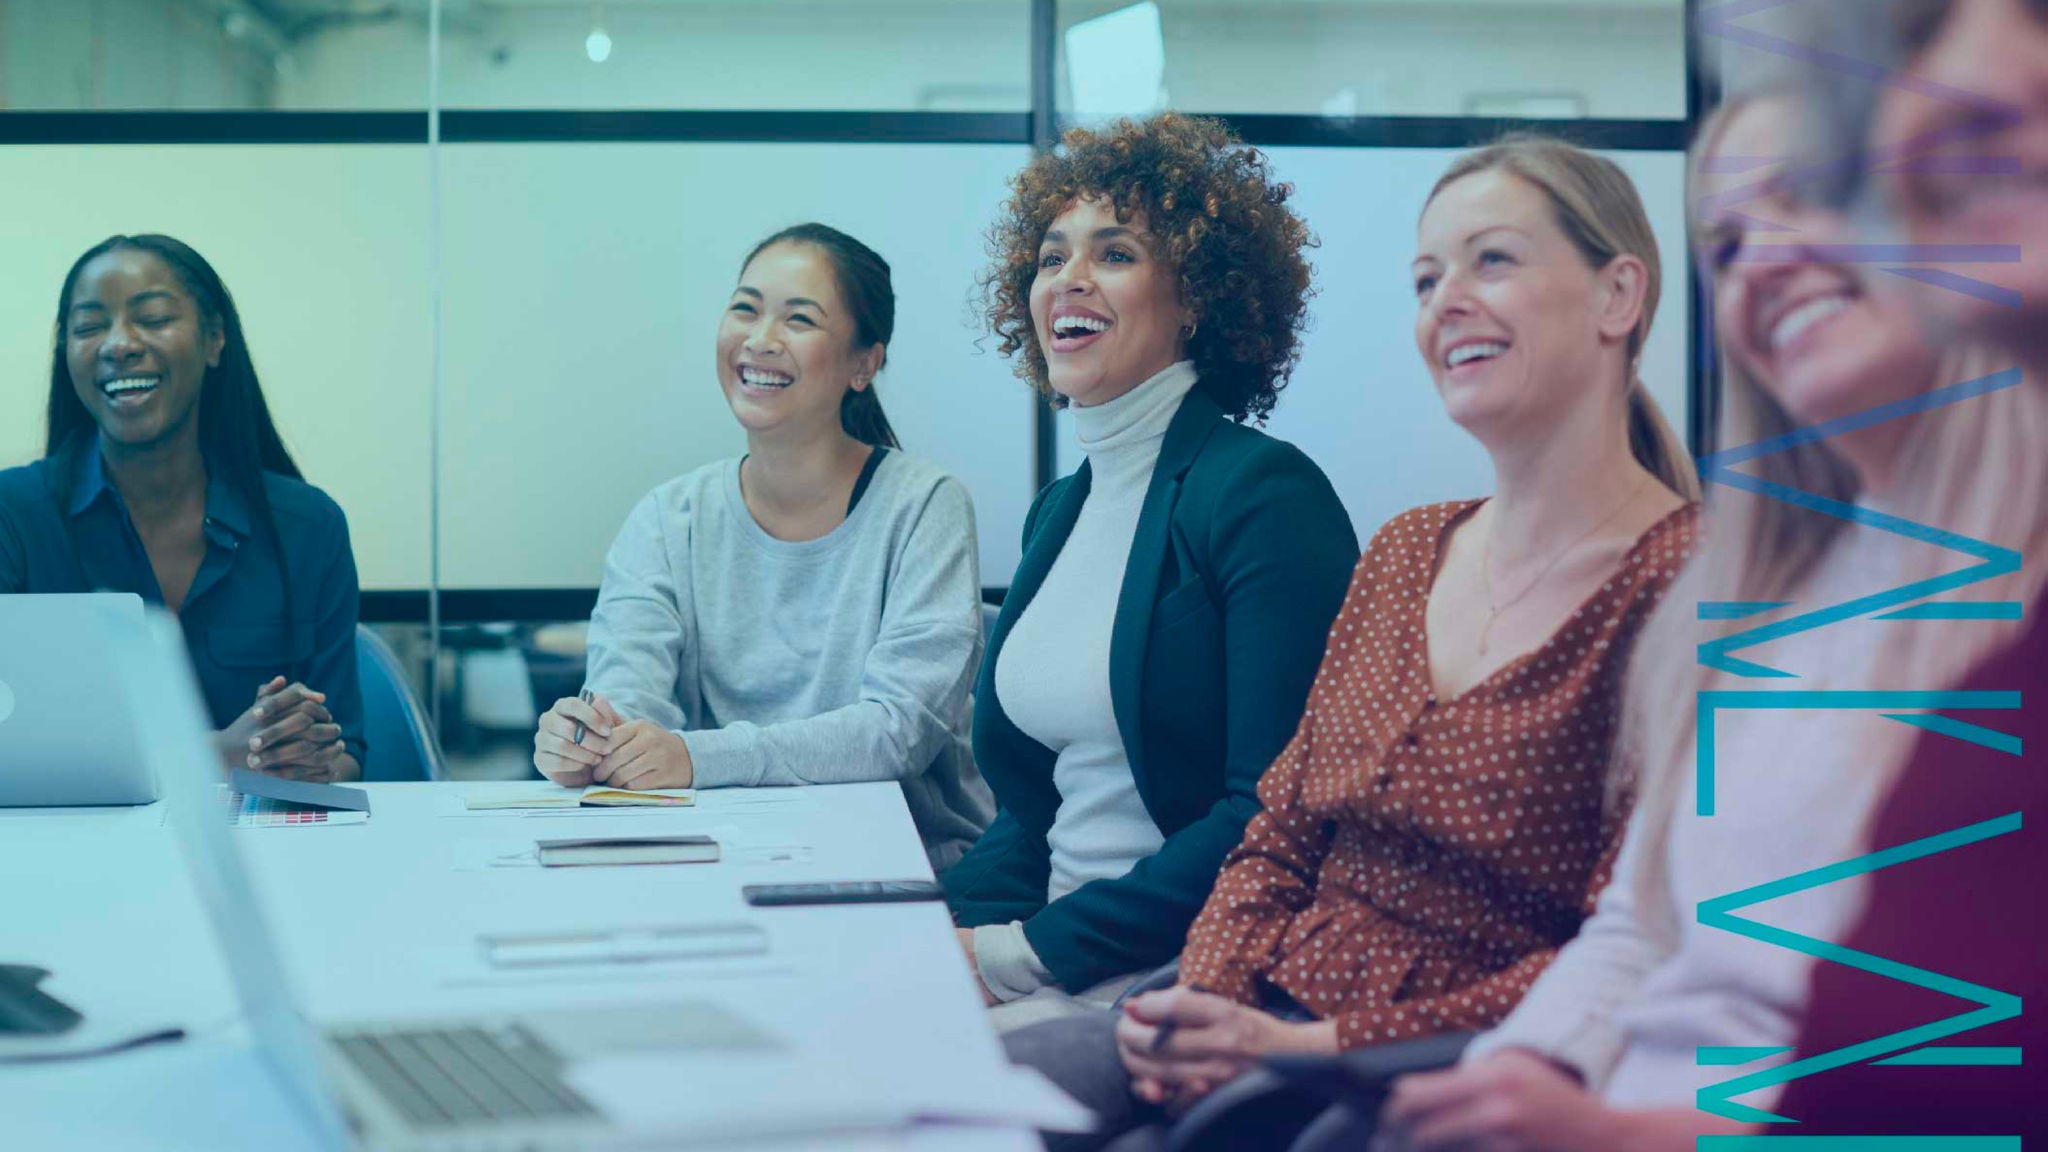 Group of smiling women around a conference table